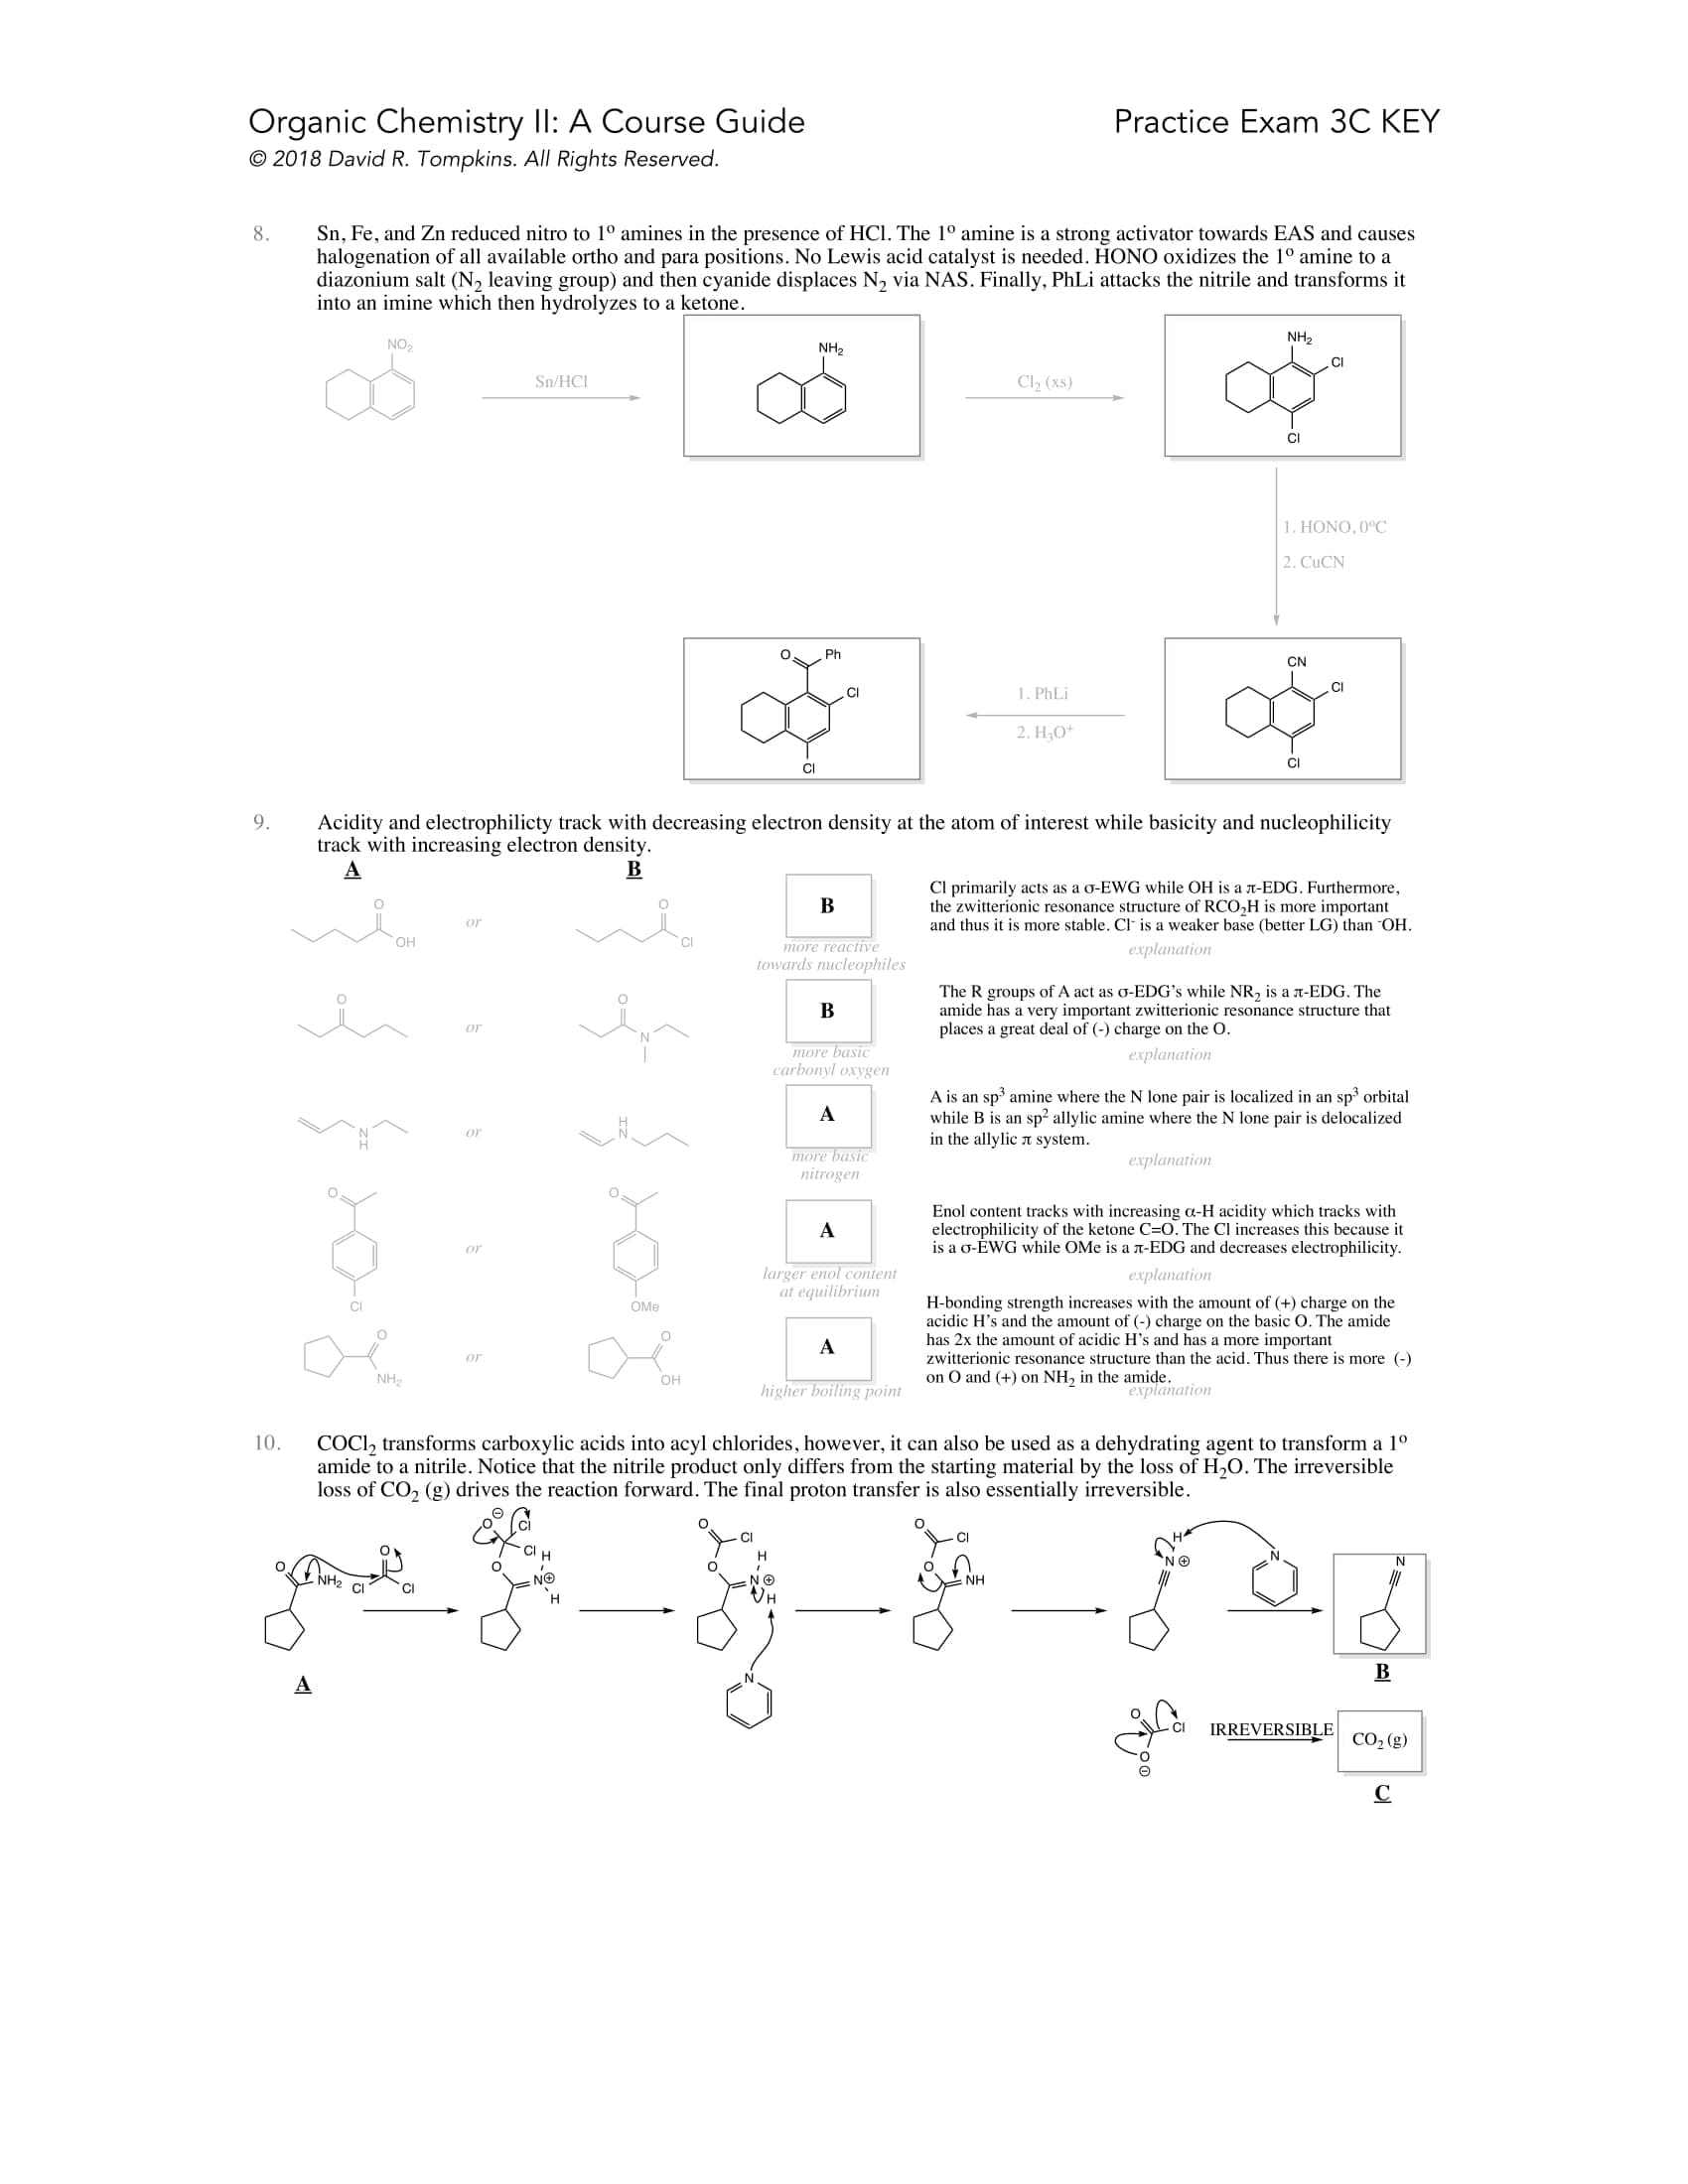 Introduction to Organic II Chemistry (Duke) Course Guide Example Page 2